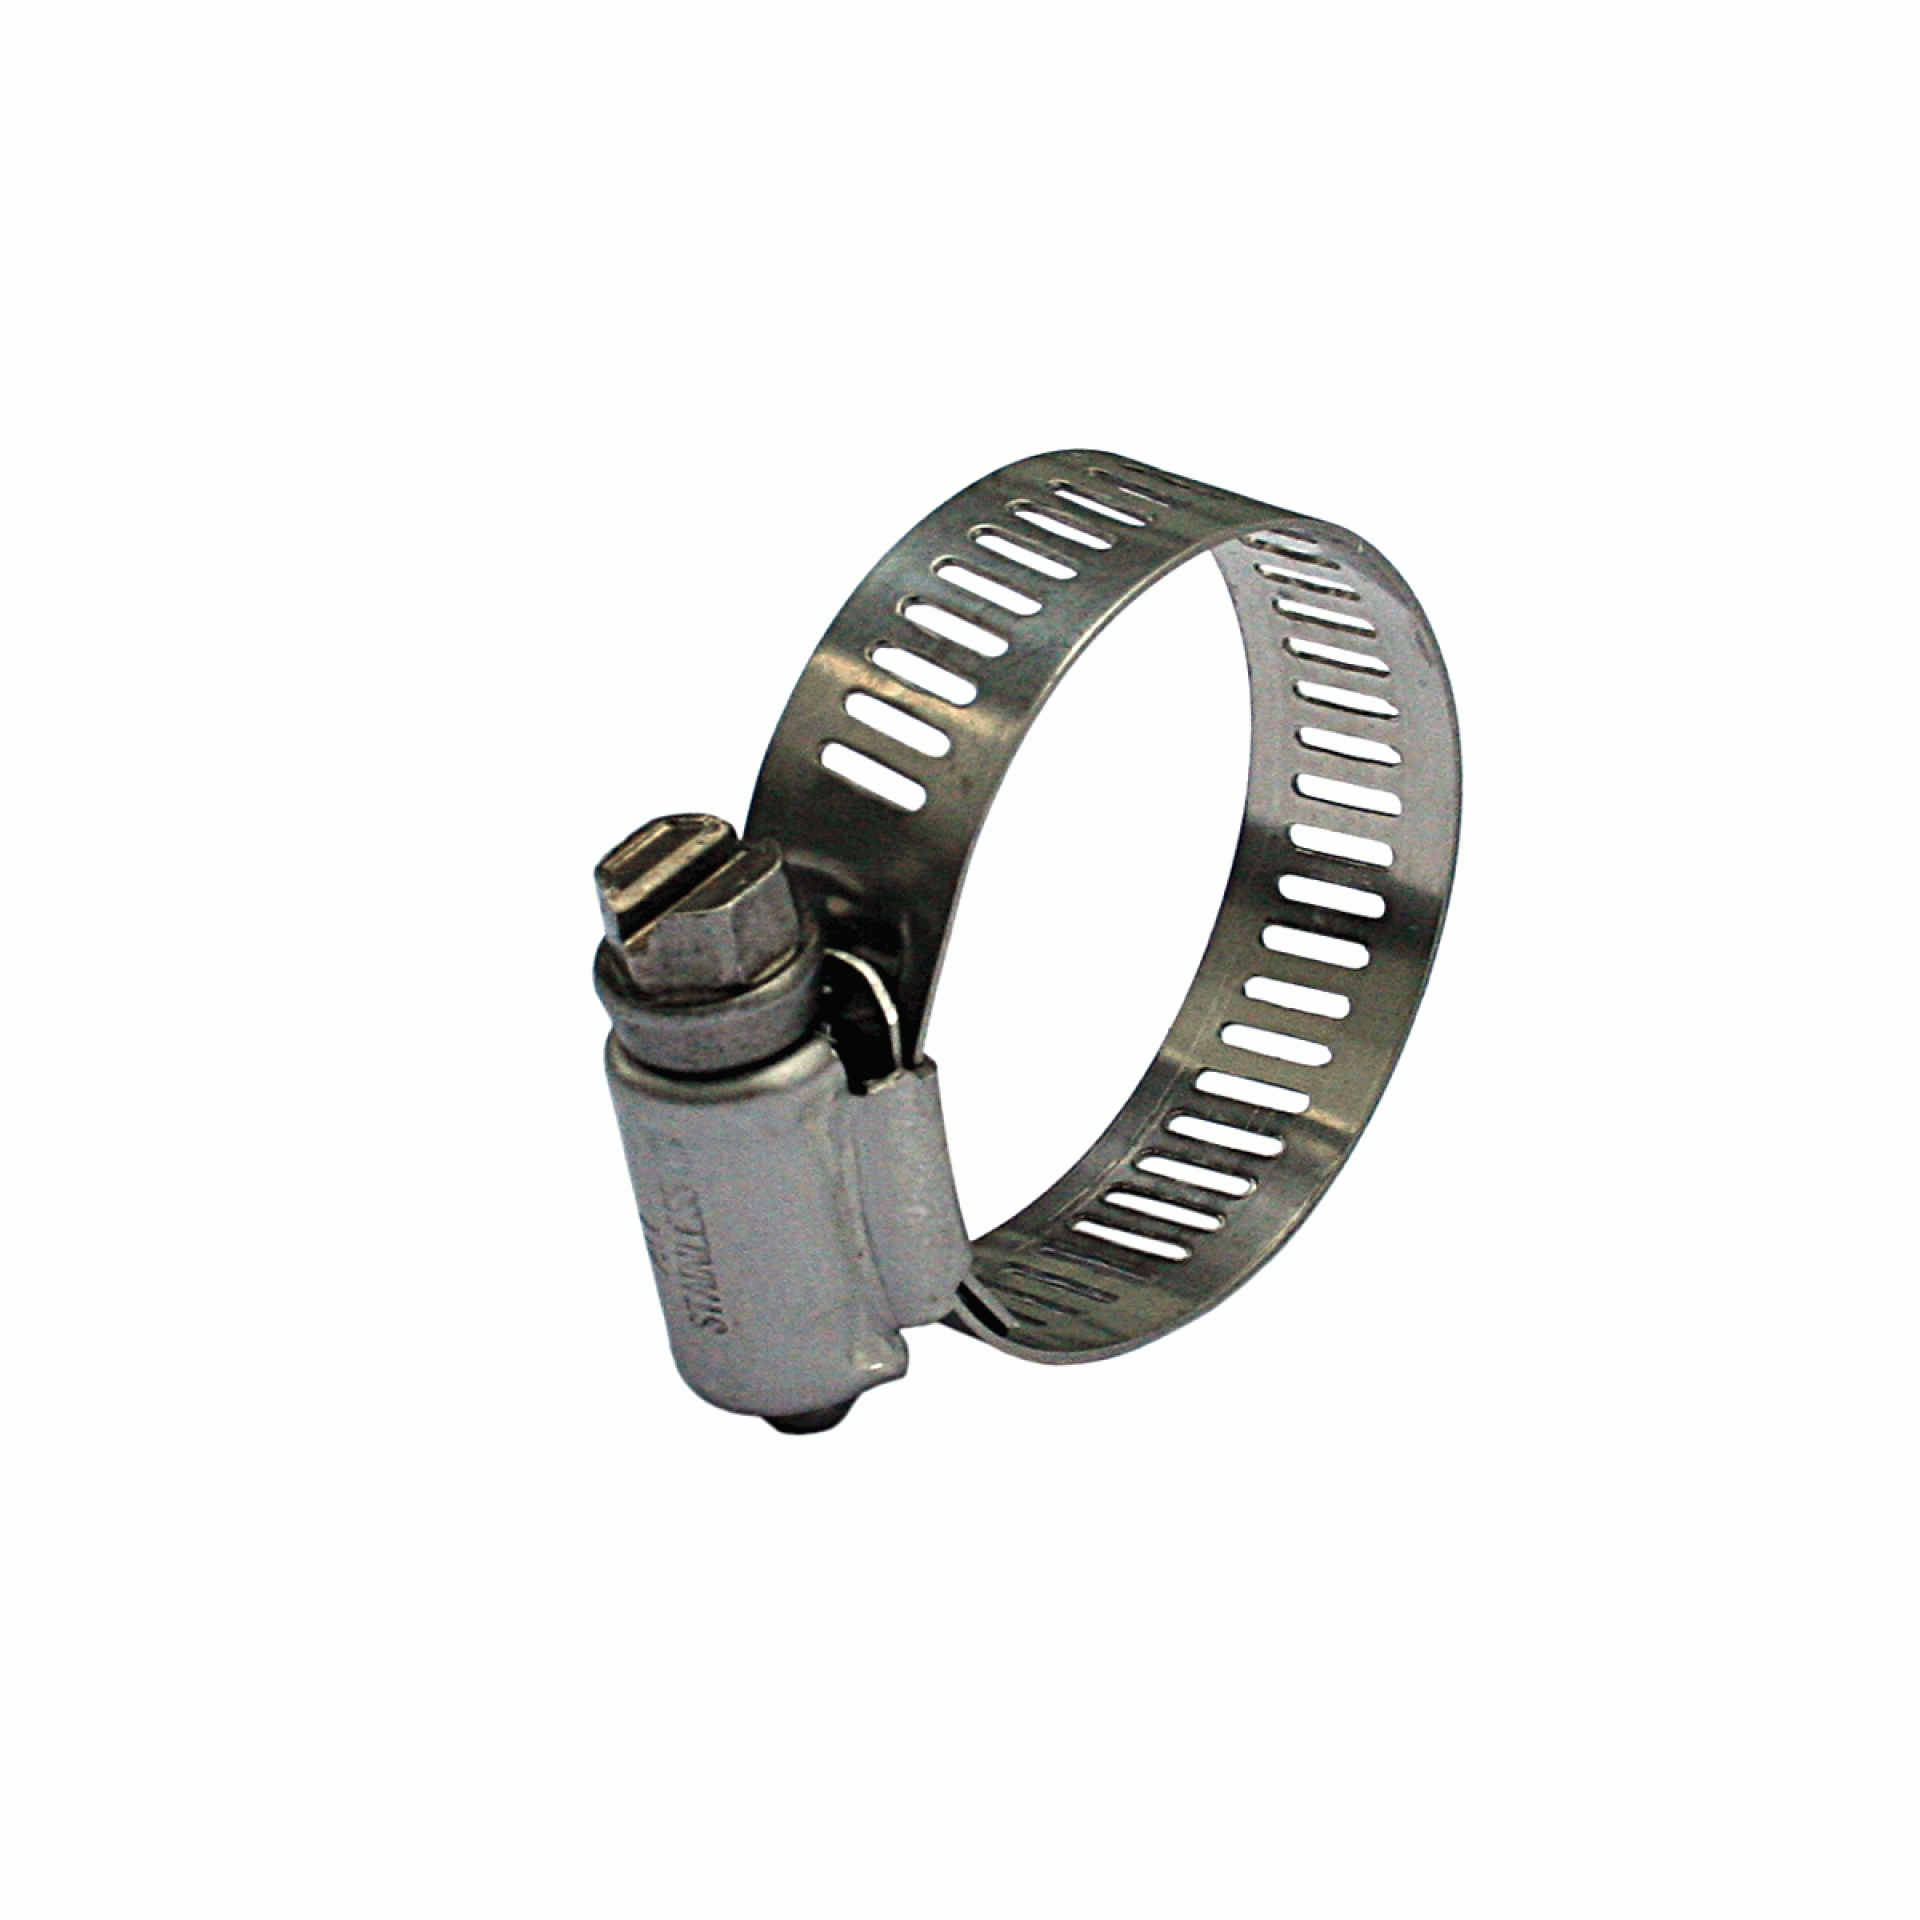 DUPAGE PRODUCTS GROUP | M6S | WIDTH 3/8"- DIA MIN. 5/16"- MAX 7/8" FITS HOSE:1/4" TO 3/8"